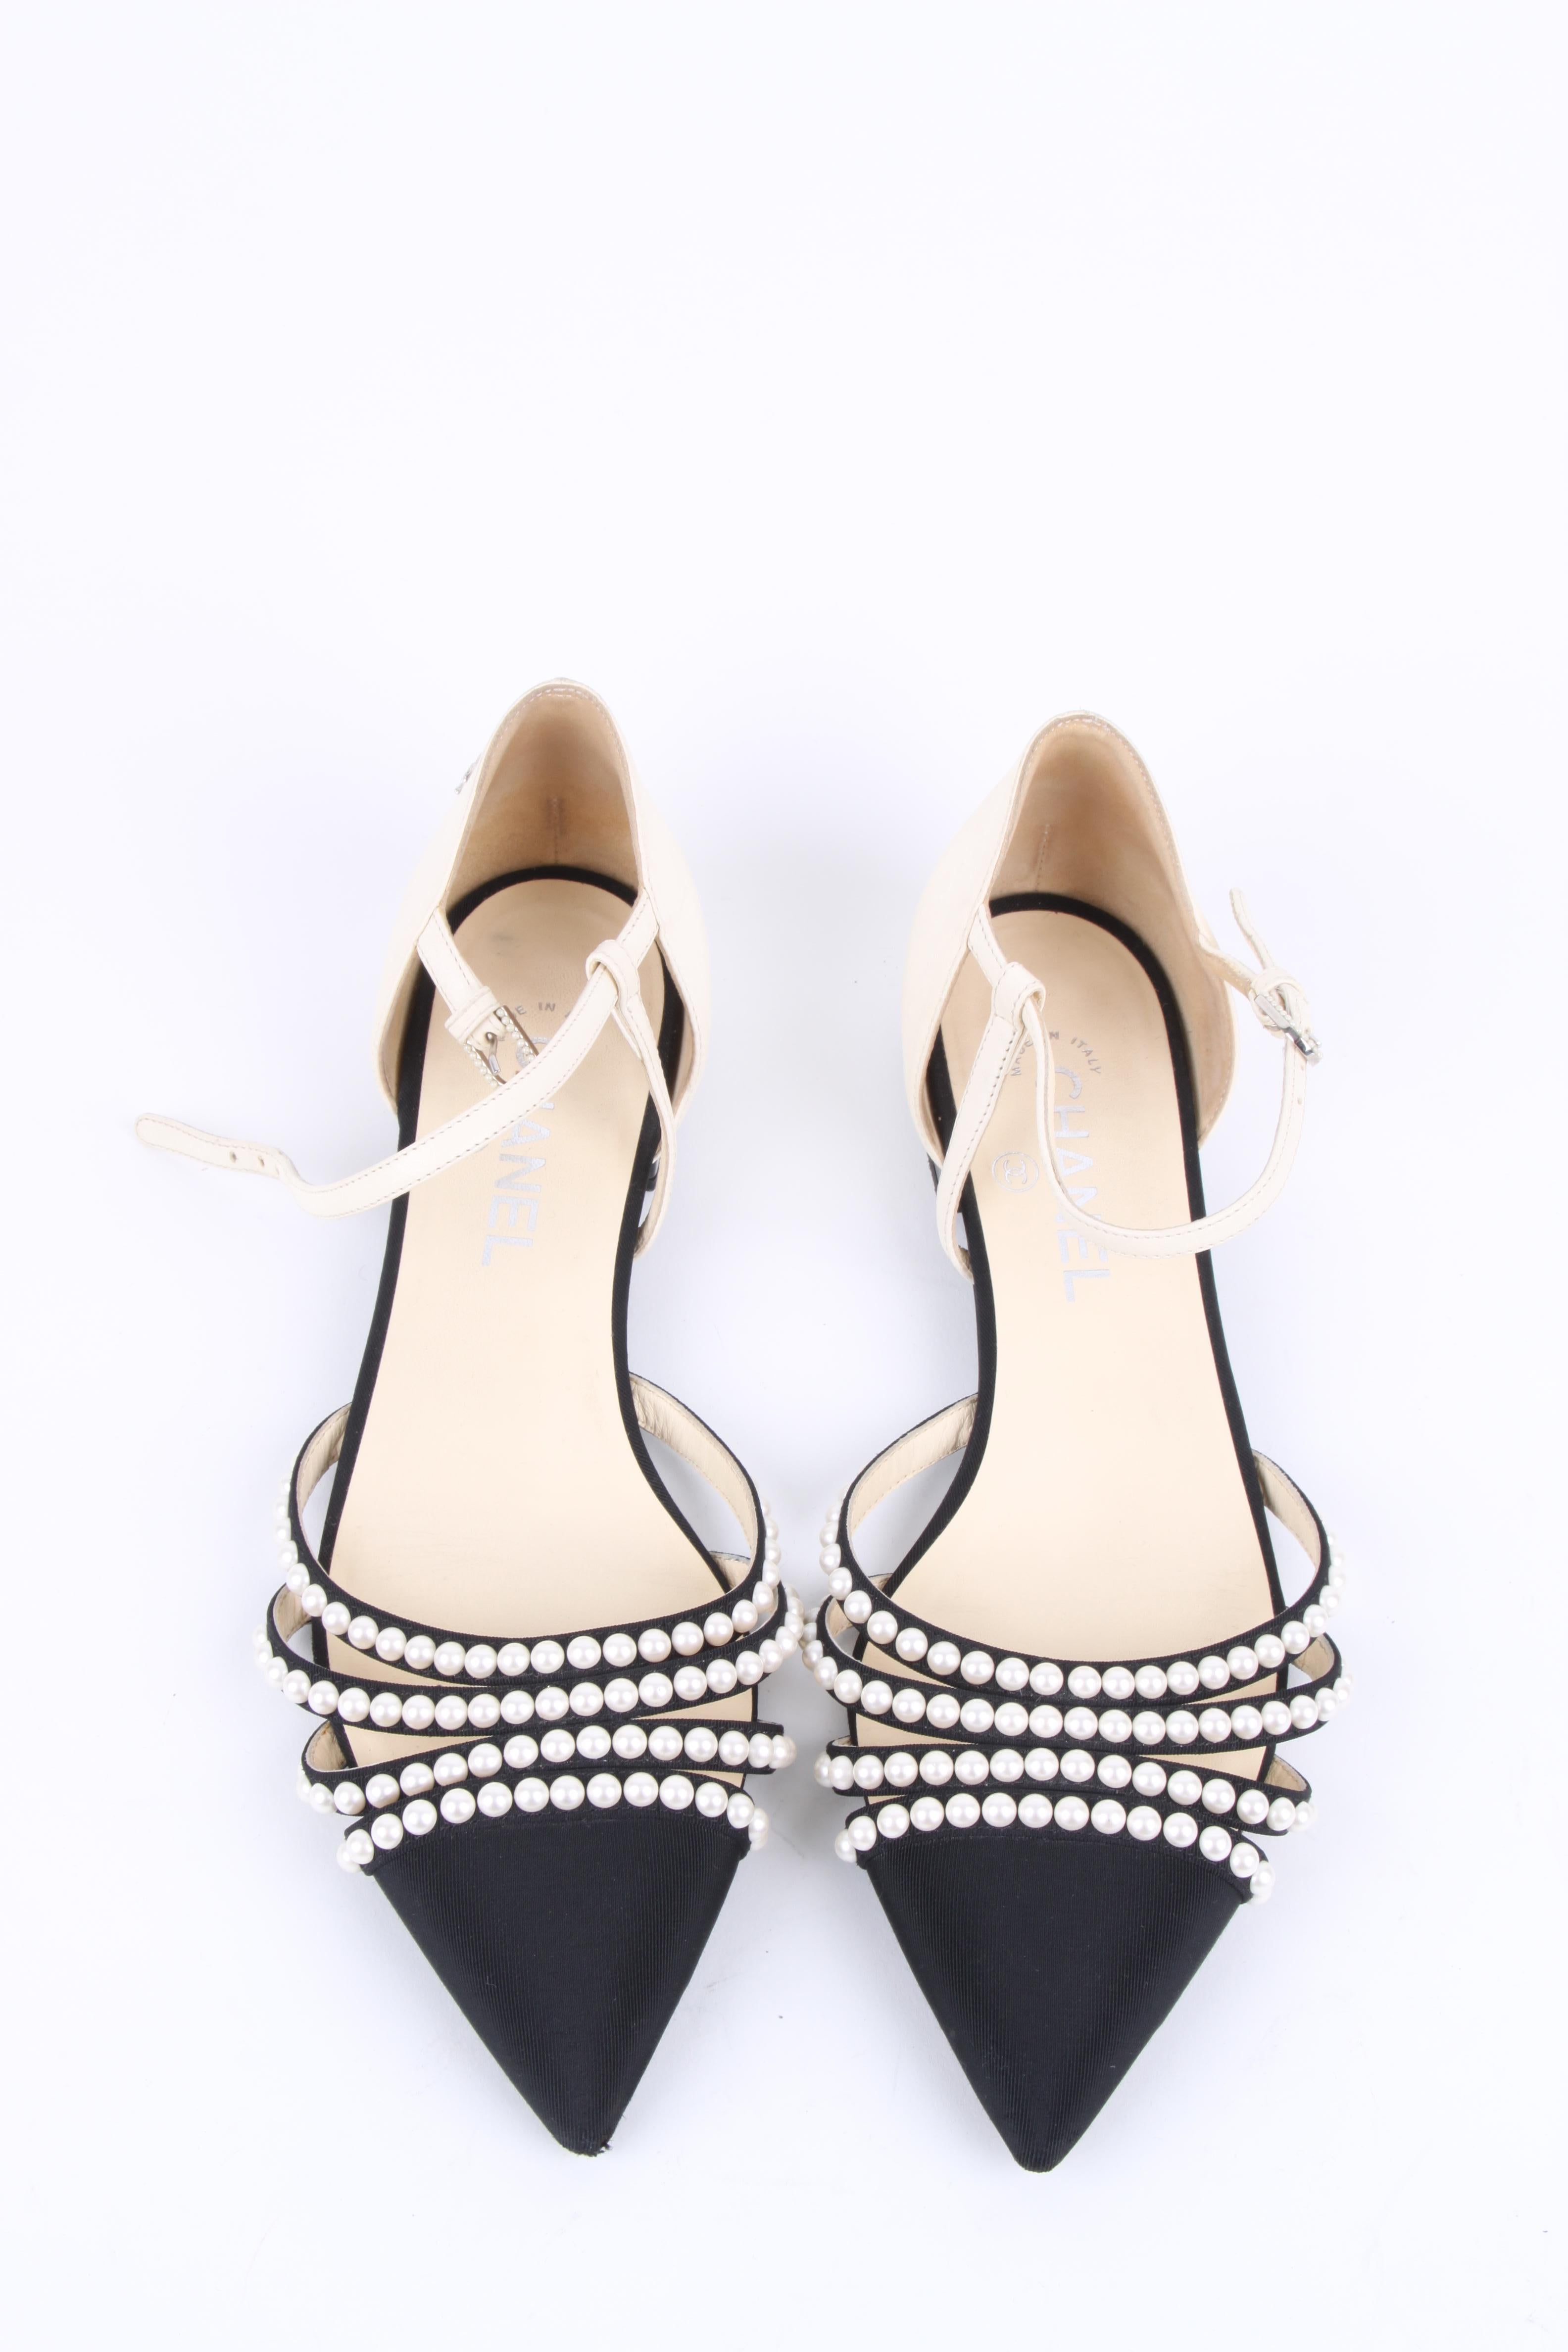 Chanel black/white leather faux pearl Paris-Rome d'Orsay flats.

These perfectly adorable Chanel Black/White Leather Faux Pearl Paris-Rome d'Orsay Flats are not to be missed. Featuring gorgeous lambskin leather uppers adorned with the signature